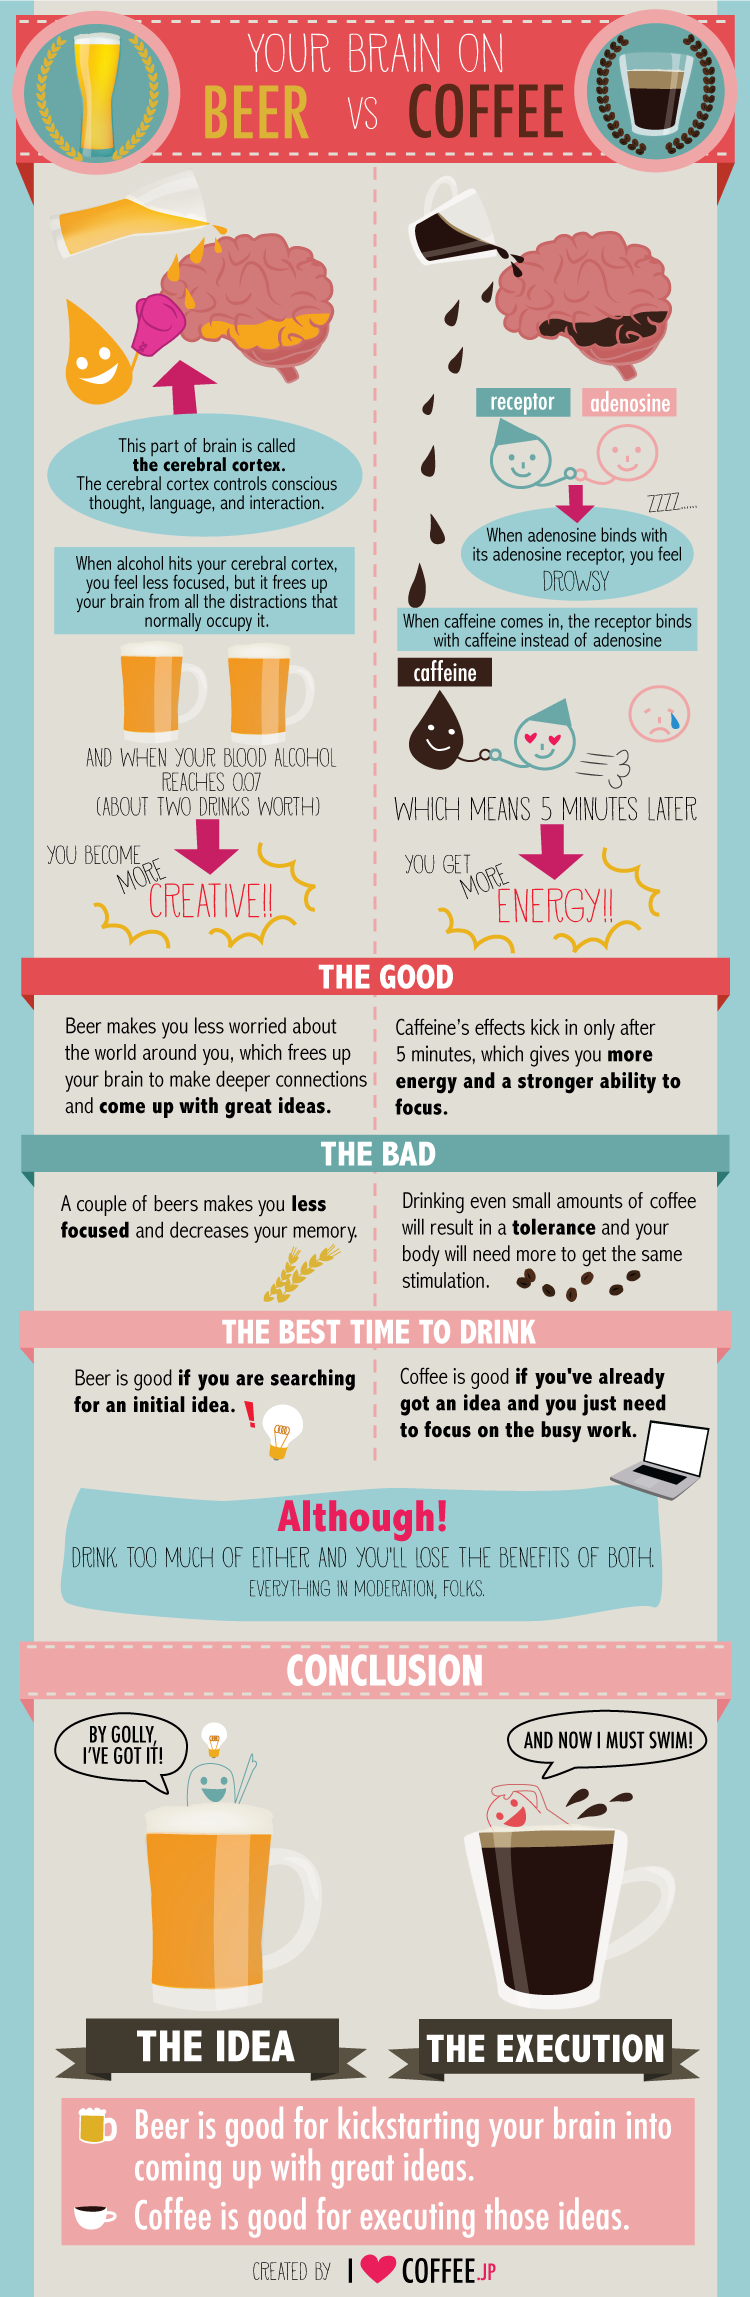 infographic-beer-coffee